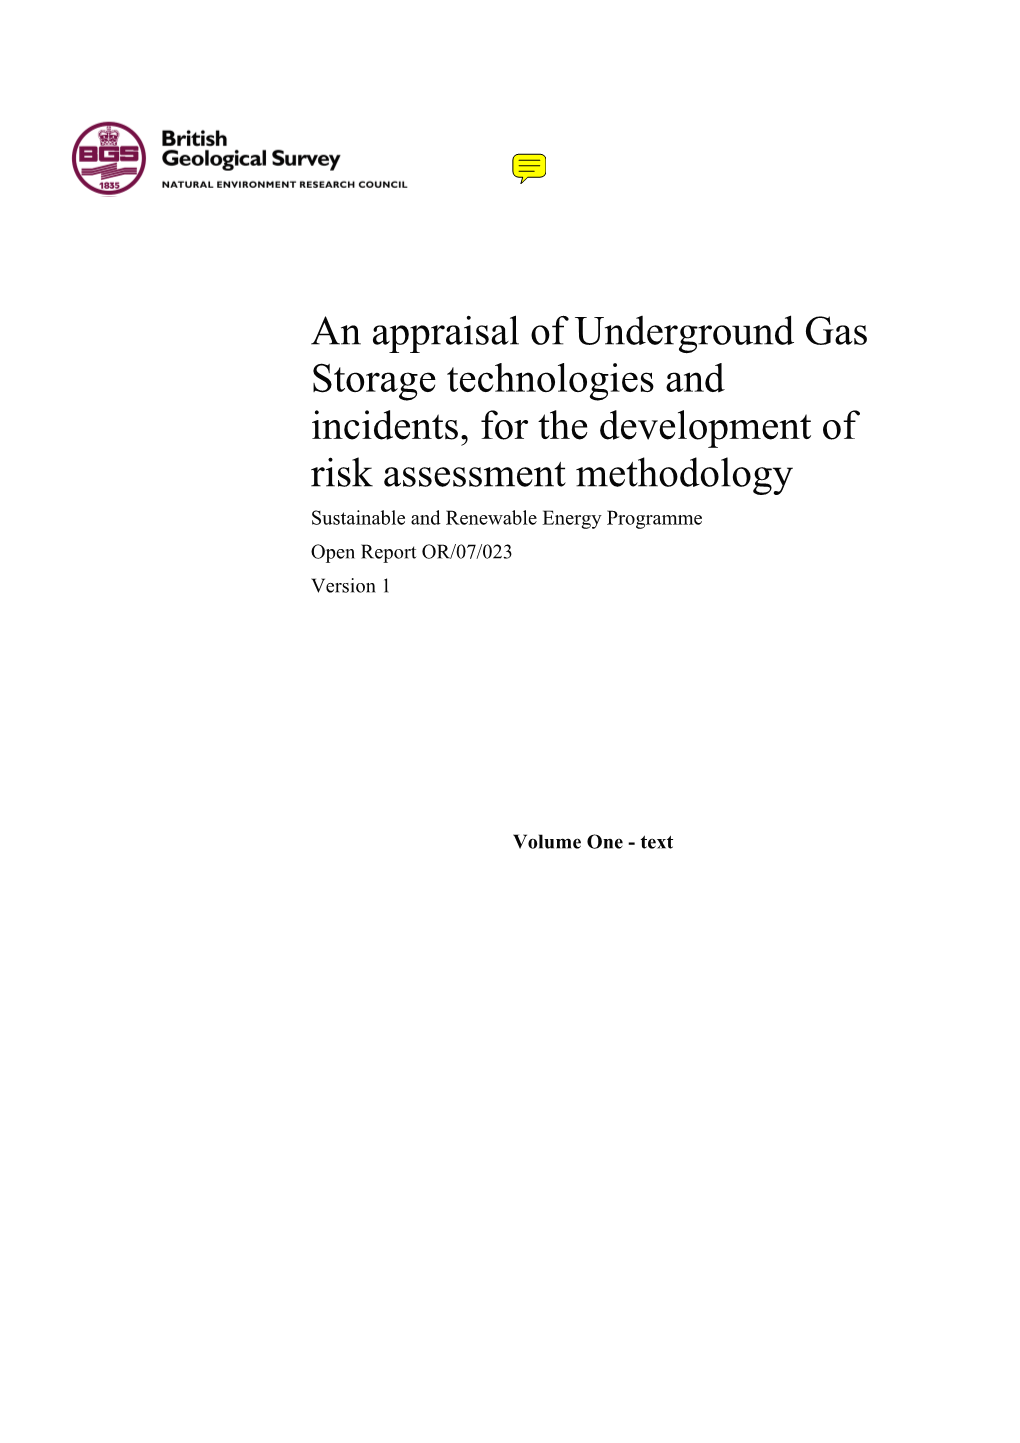 An Appraisal of Underground Gas Storage Technologies and Incidents